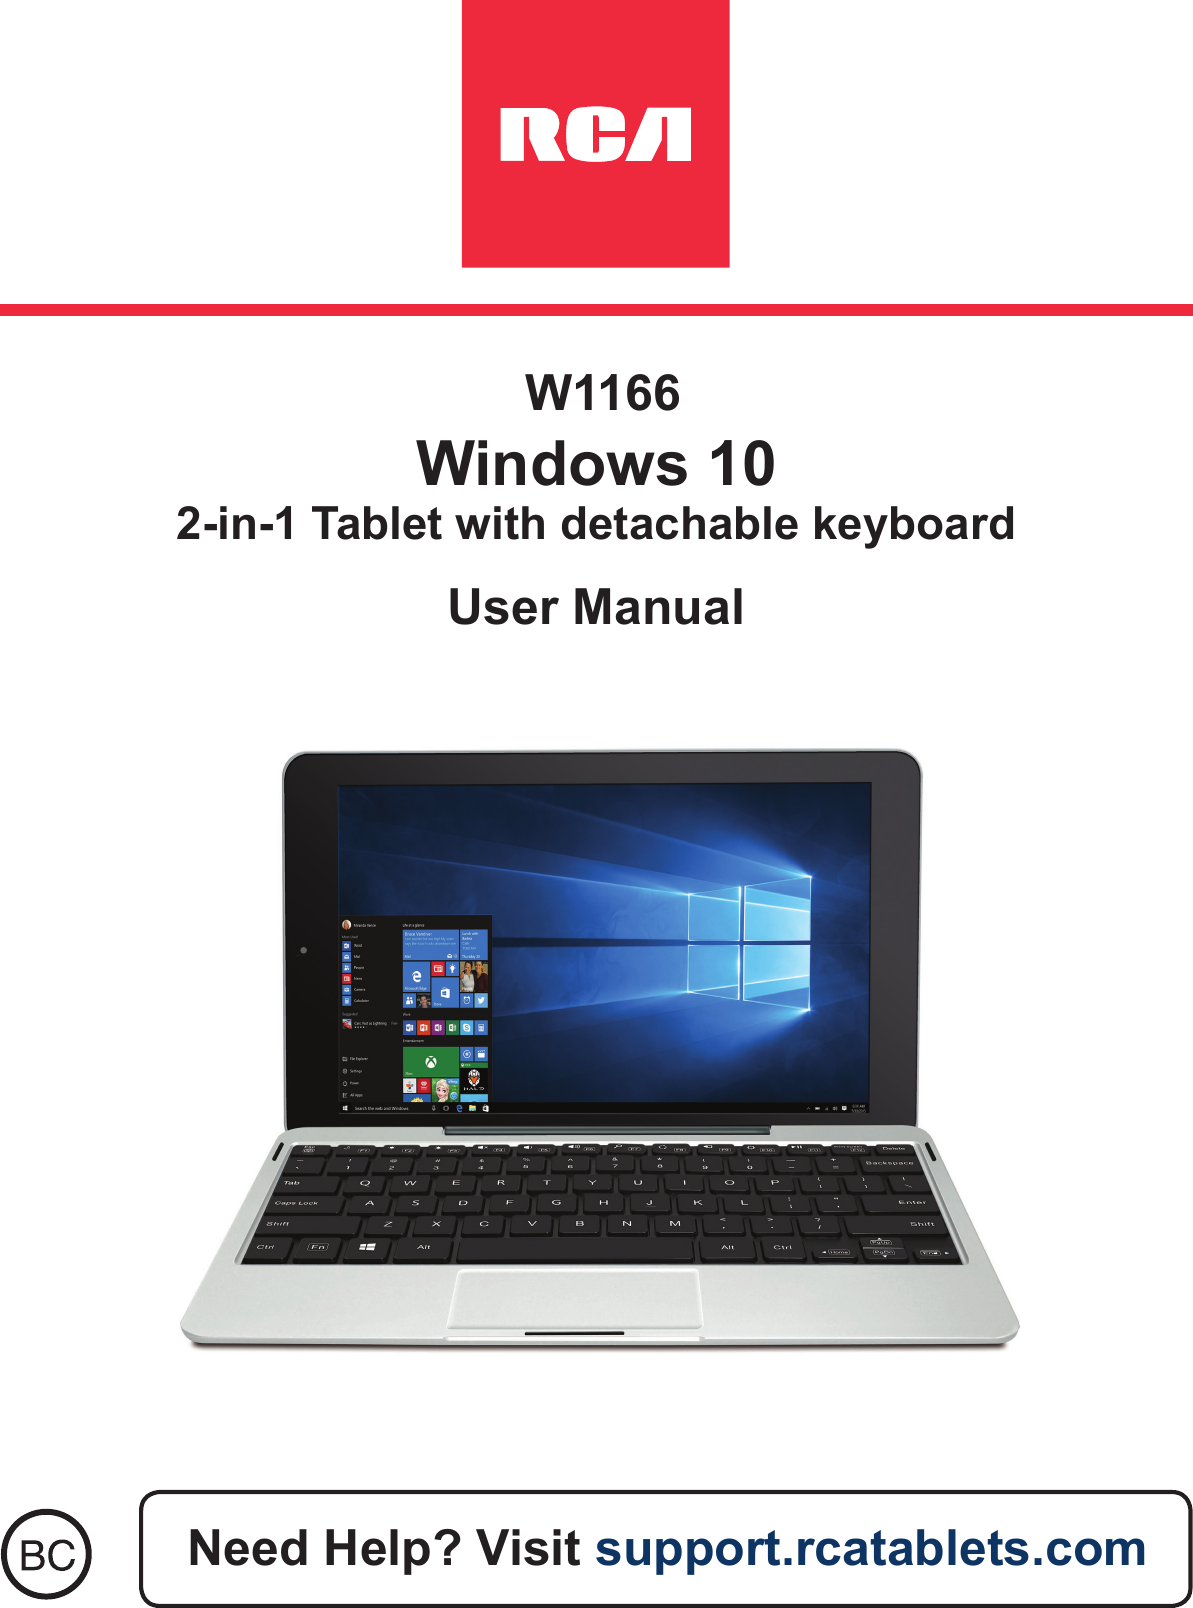  W1166Windows 10 2-in-1 Tablet with detachable keyboardUser ManualNeed Help? Visit support.rcatablets.com